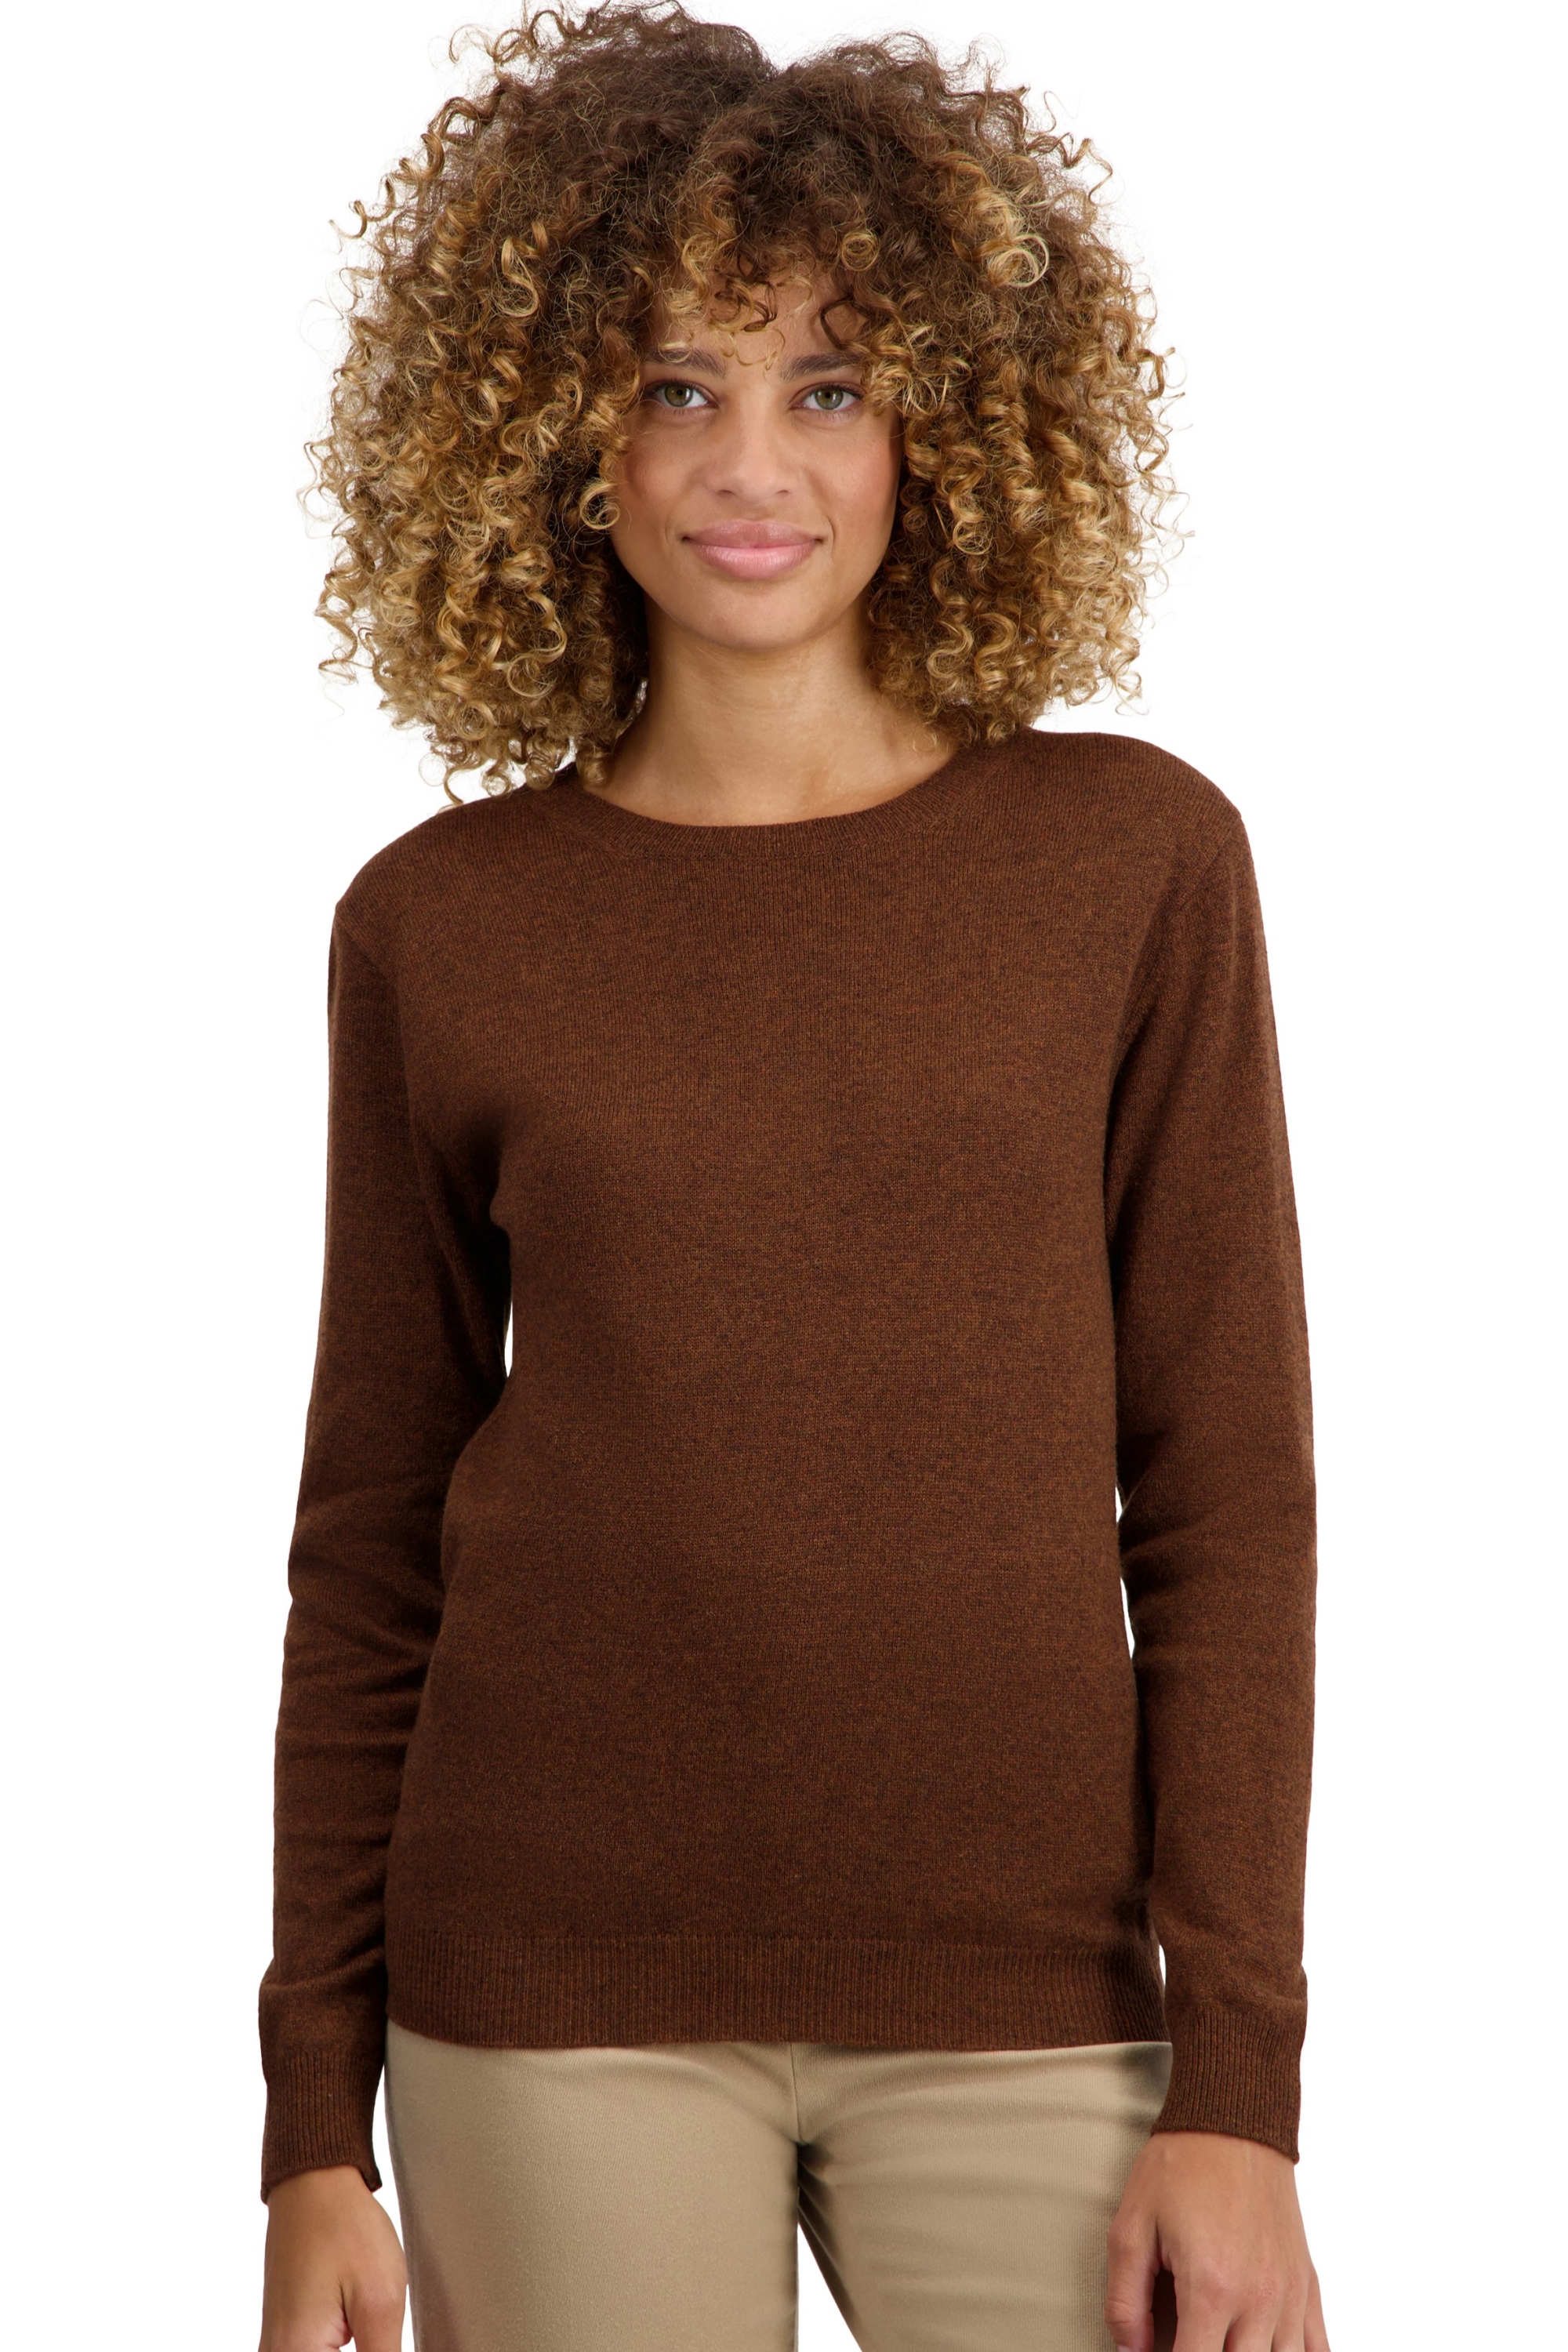 Cashmere ladies basic sweaters at low prices thalia first mace m